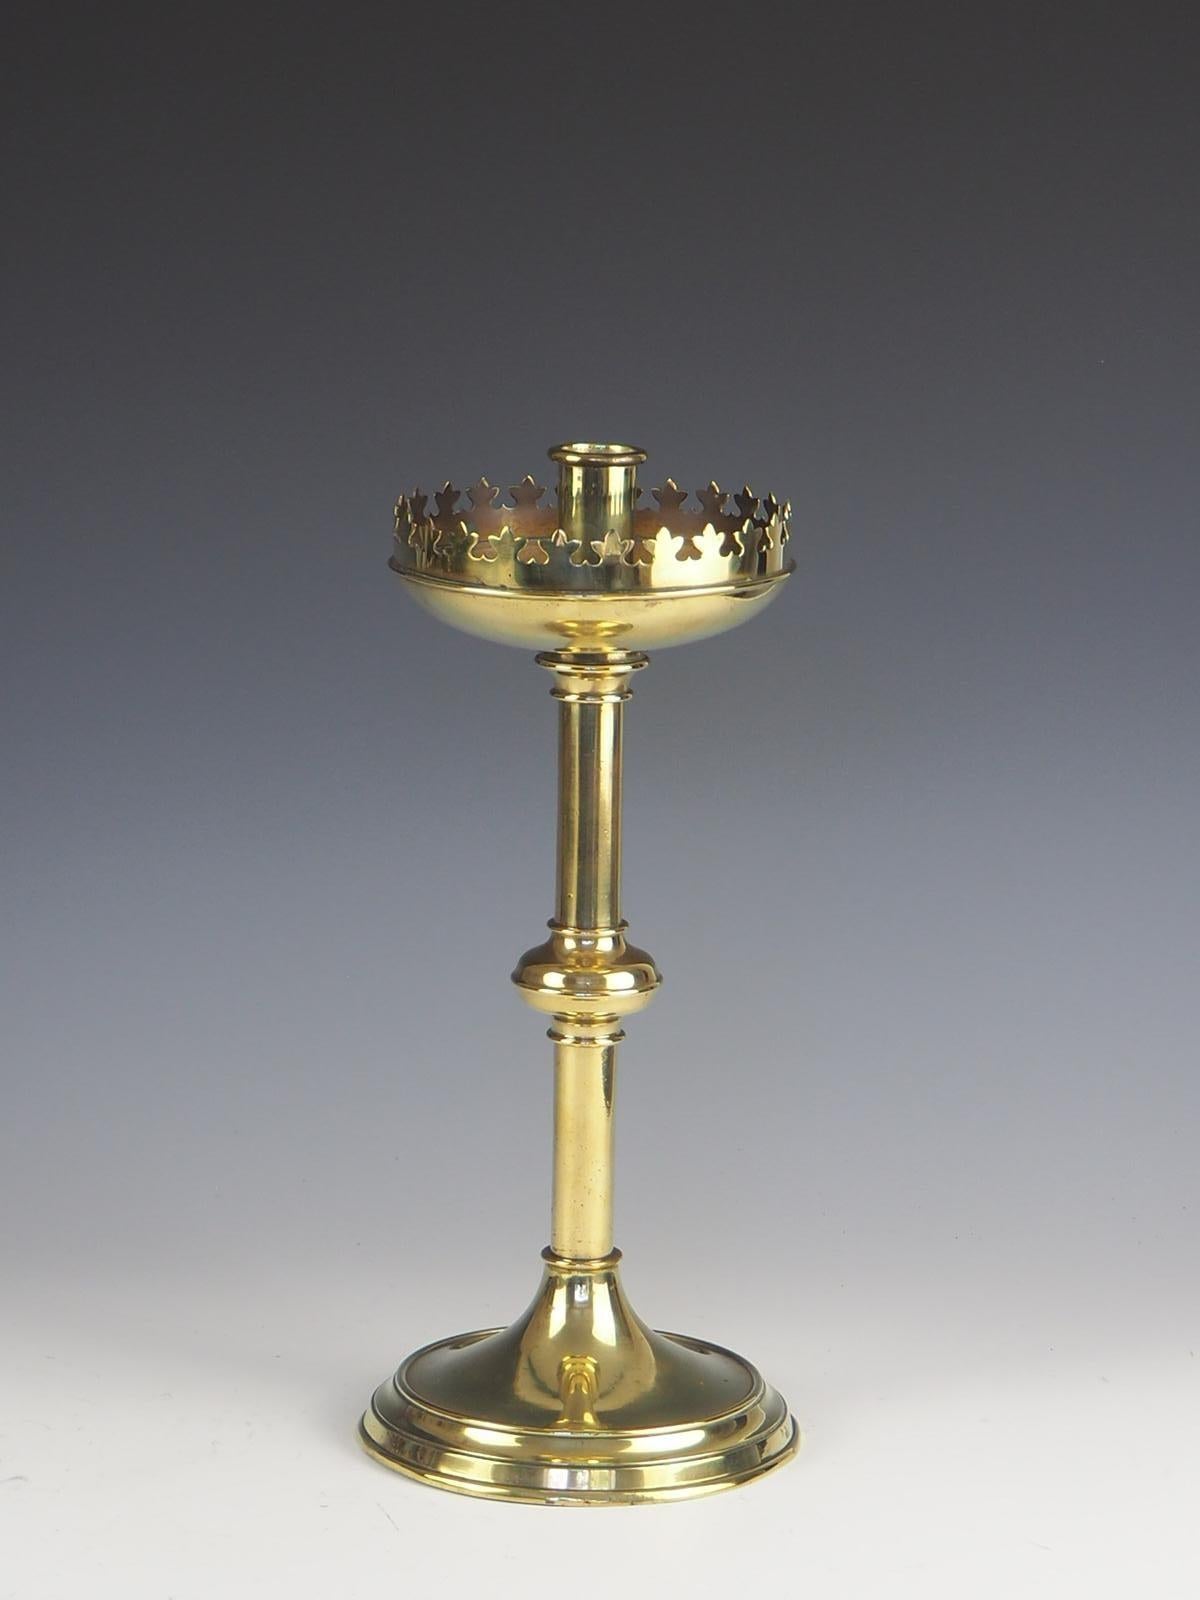 Decorative late 19th century Gothic brass candlestick. The candlestick consist of a rimmed edge with a drip pan.

Leads down to a column supported by a stepped circular base.